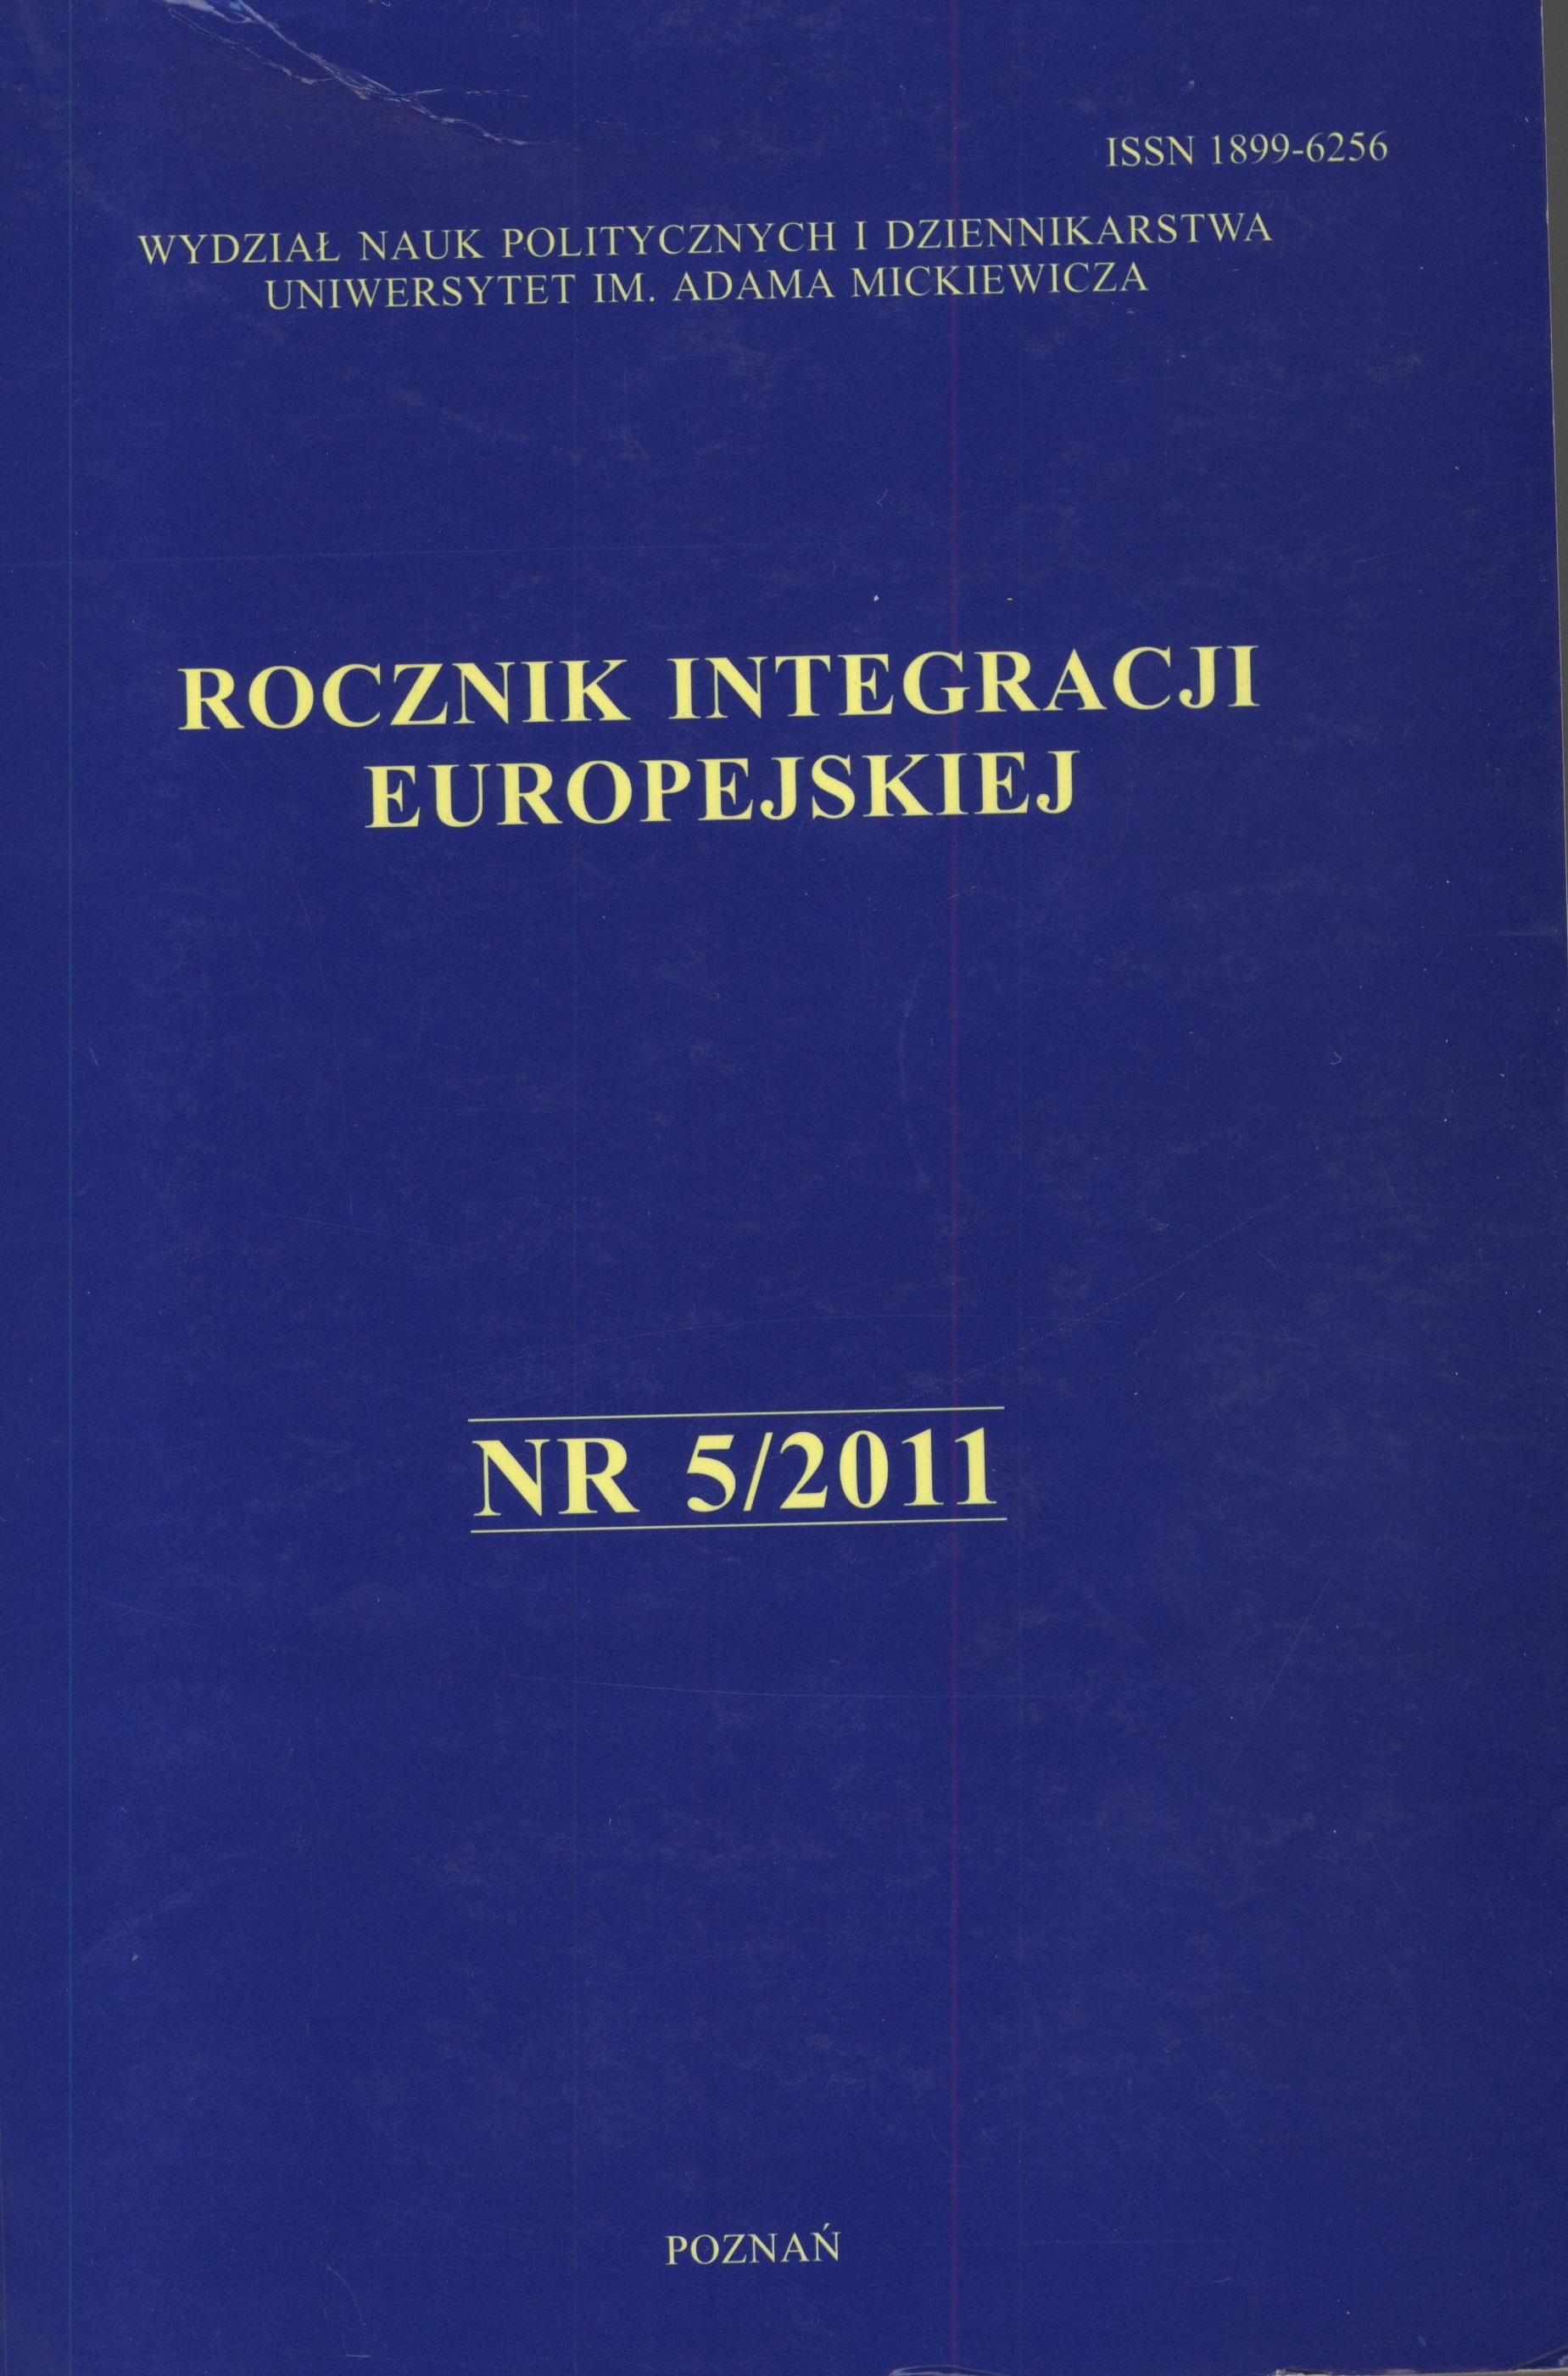 The determinants and priorities of the Polish presidency in the Council of the European Union in 2011 Cover Image